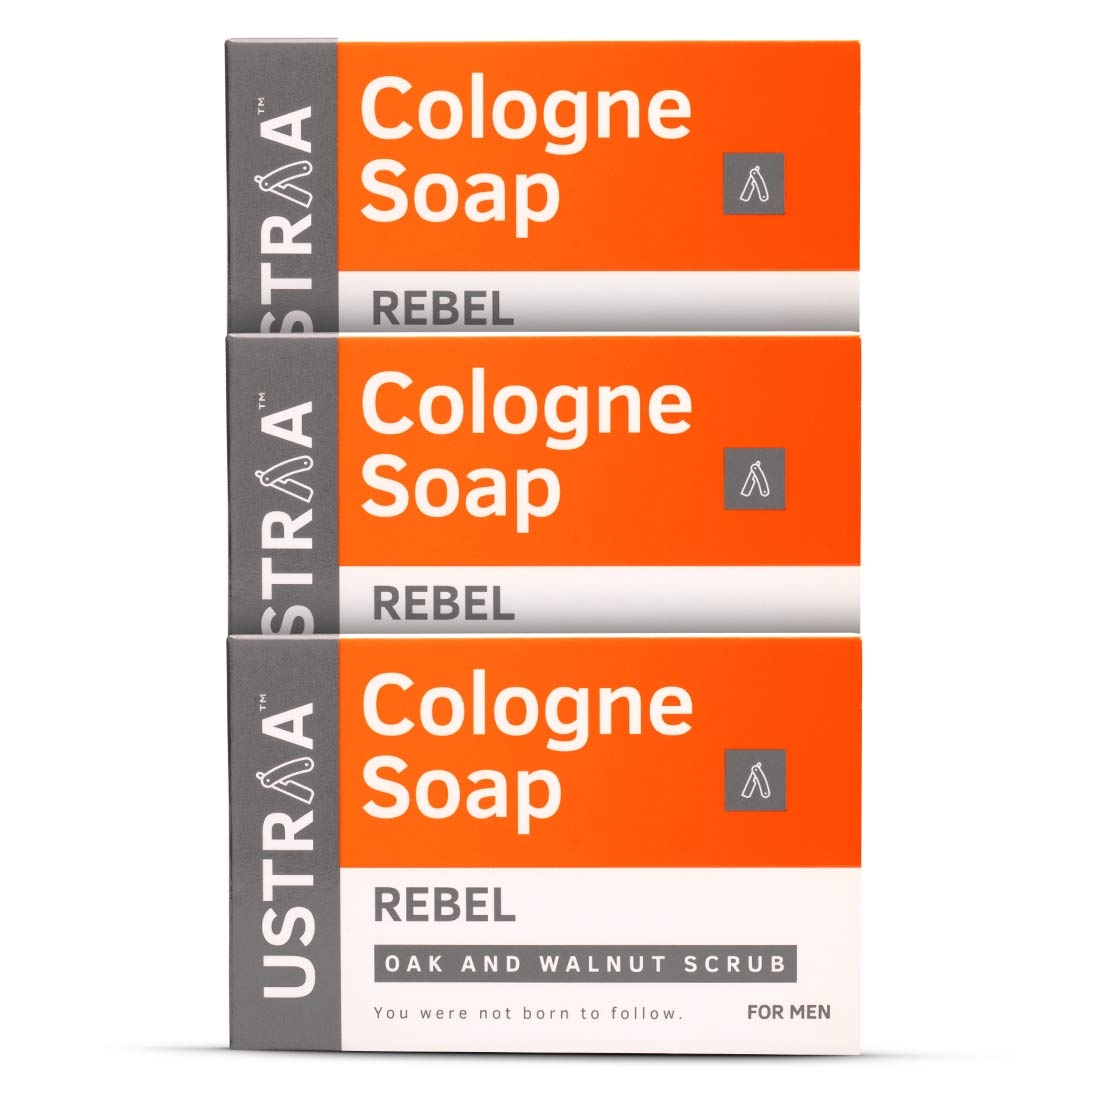 Ustraa | Ustraa Body Lotion Germ Free - 200ml & Cologne Soap Rebel - Pack of 3 1